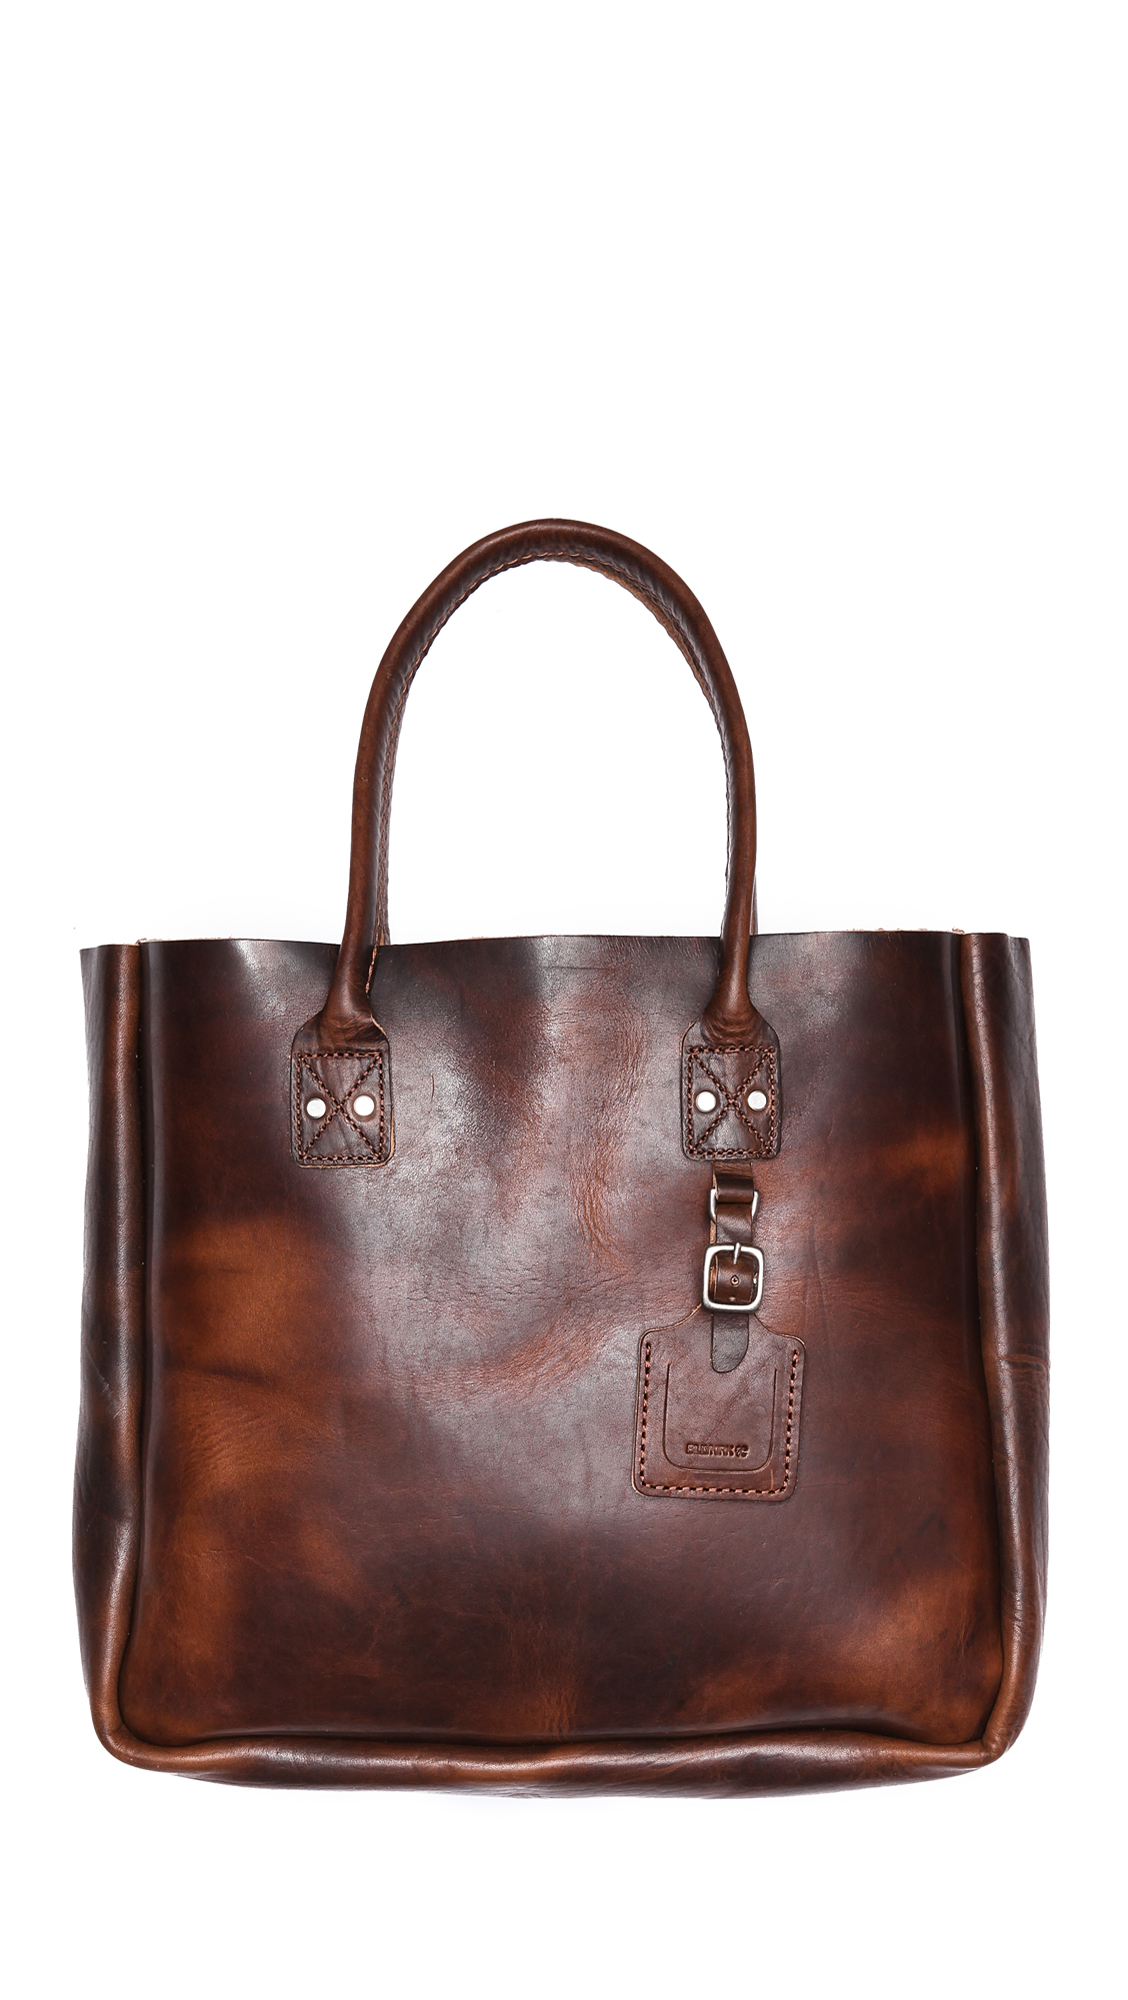 Lyst - Billykirk Leather Tote in Brown for Men